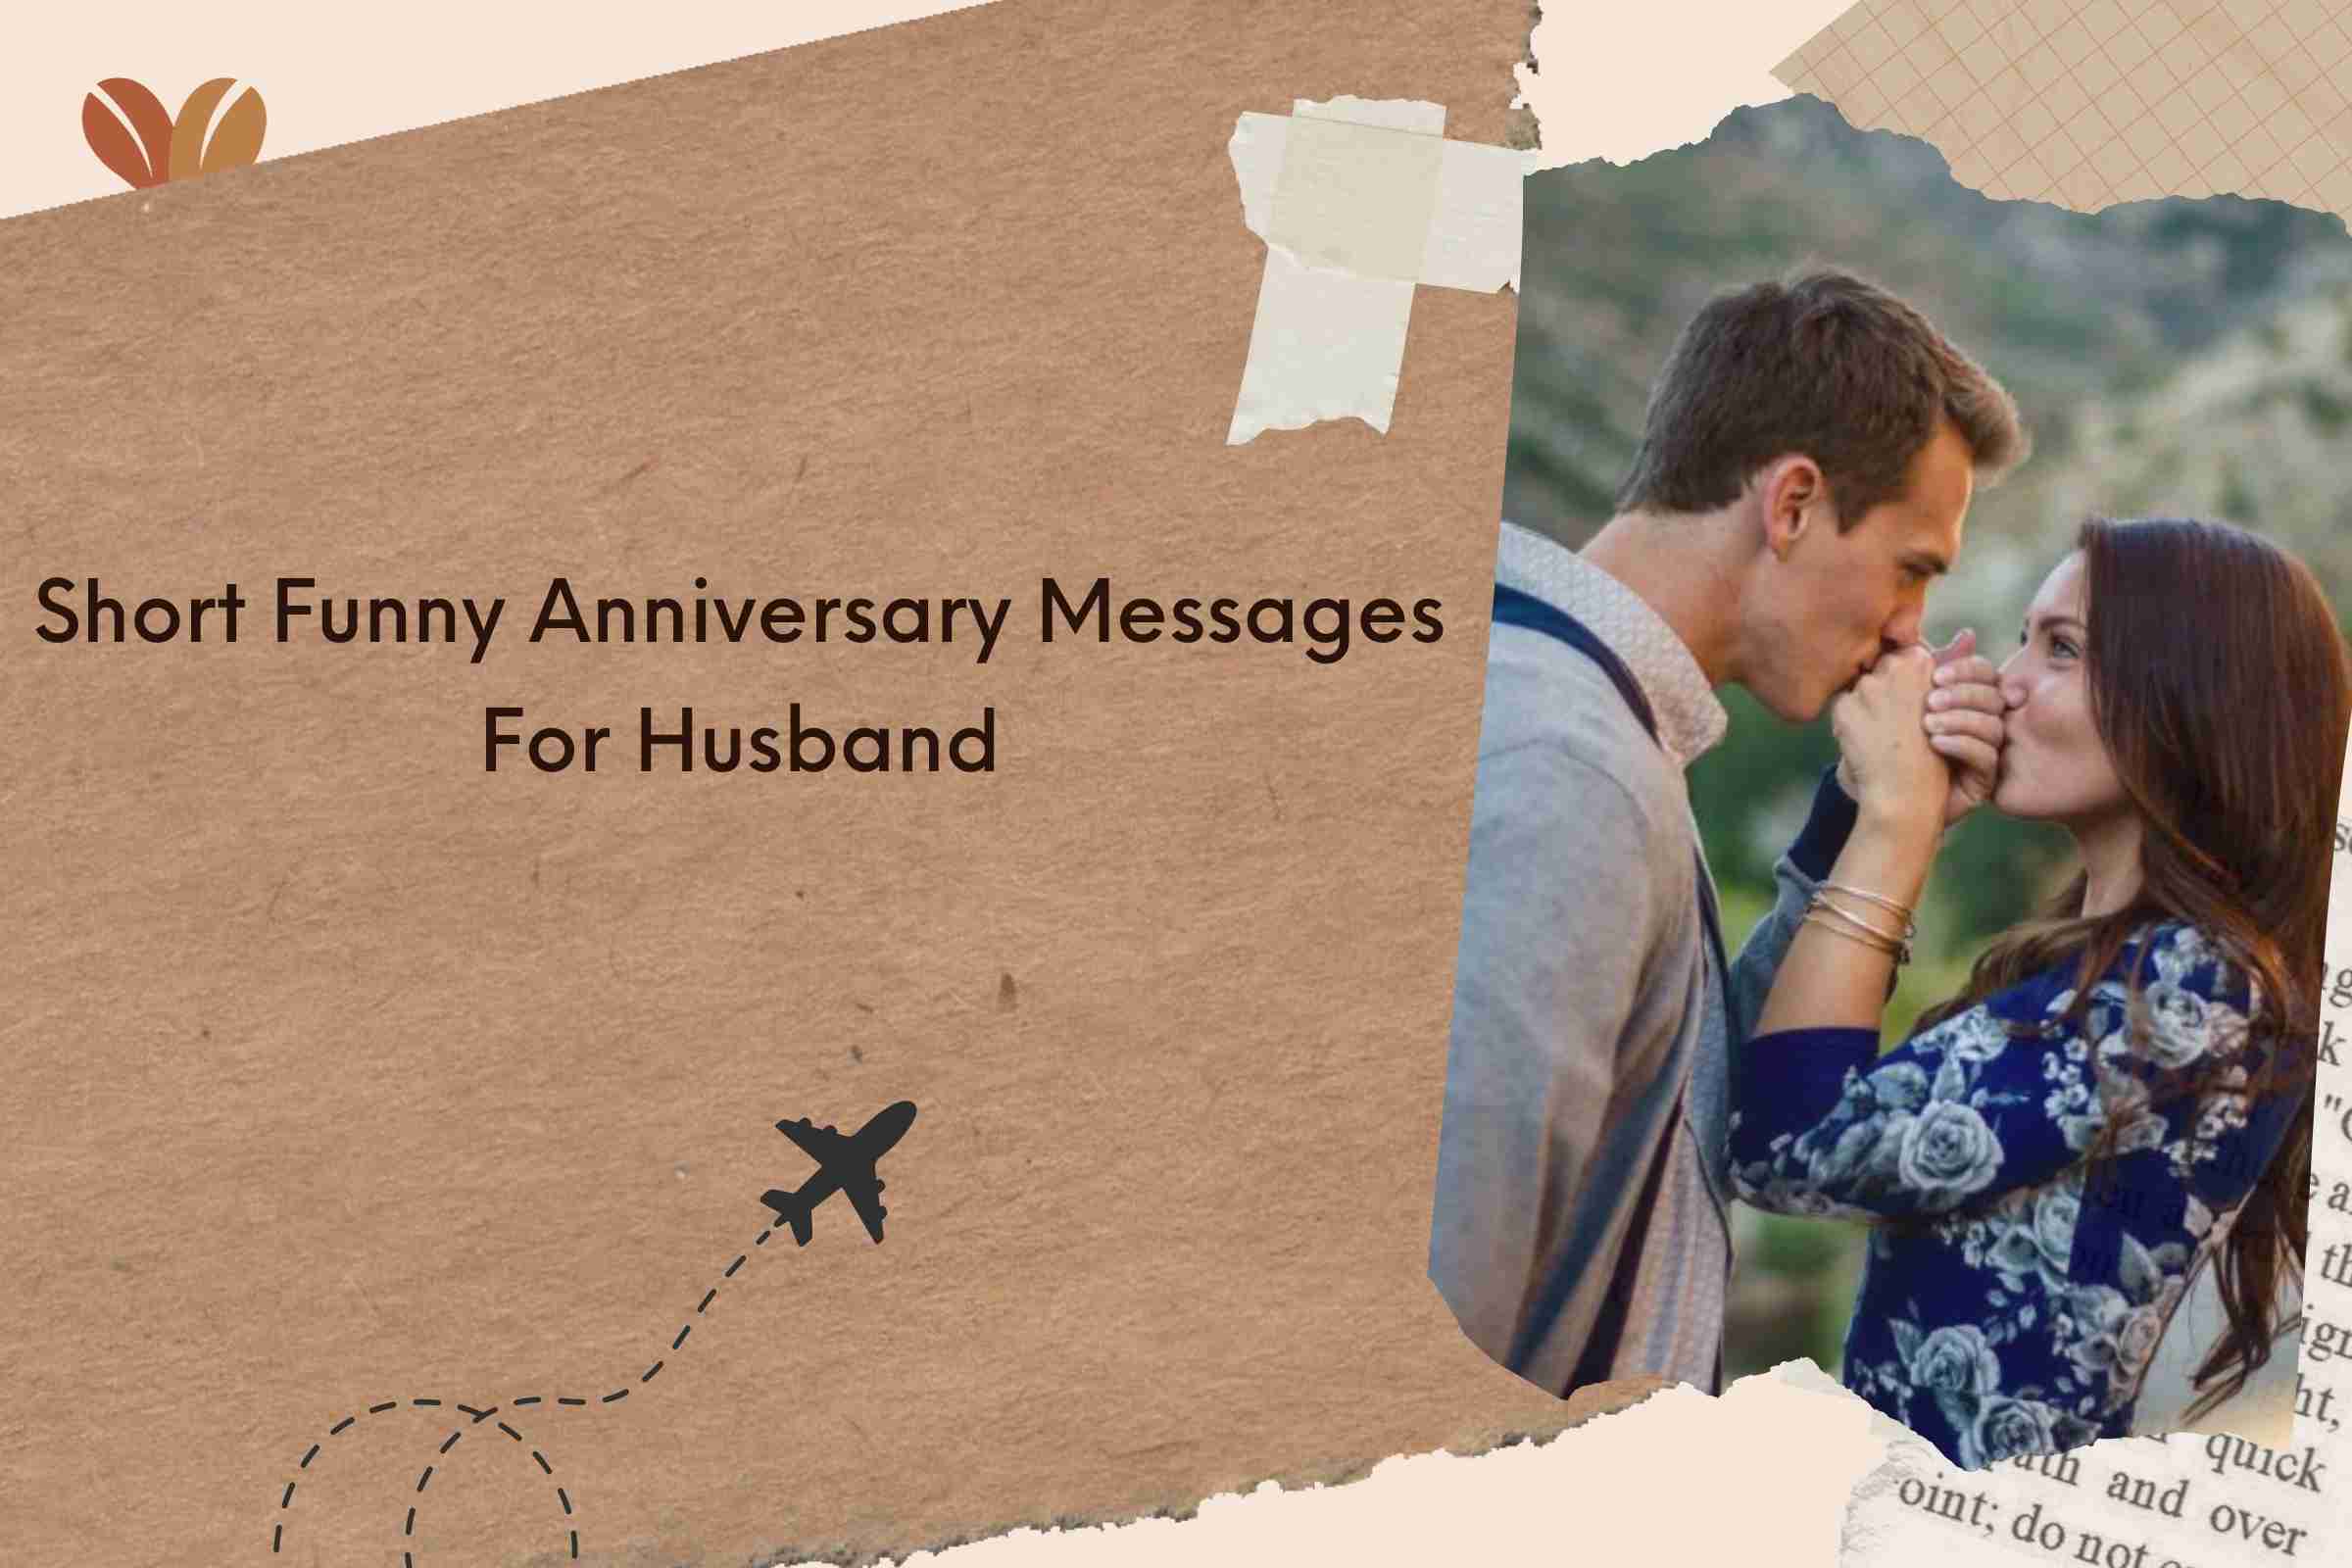 Short Funny Anniversary Messages For Husband